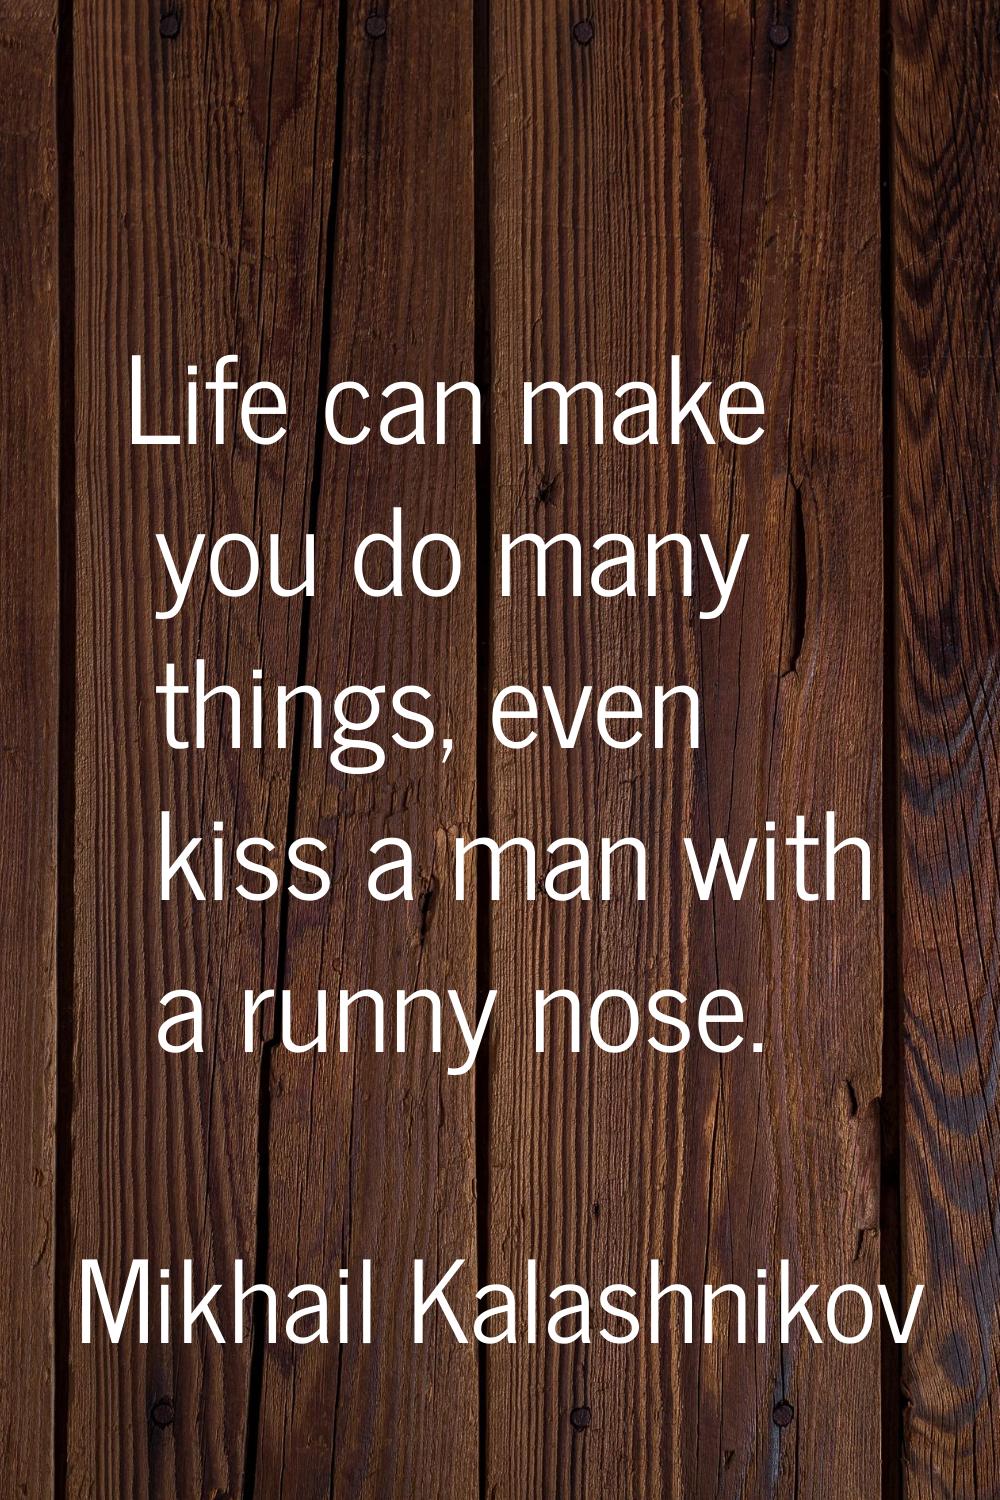 Life can make you do many things, even kiss a man with a runny nose.